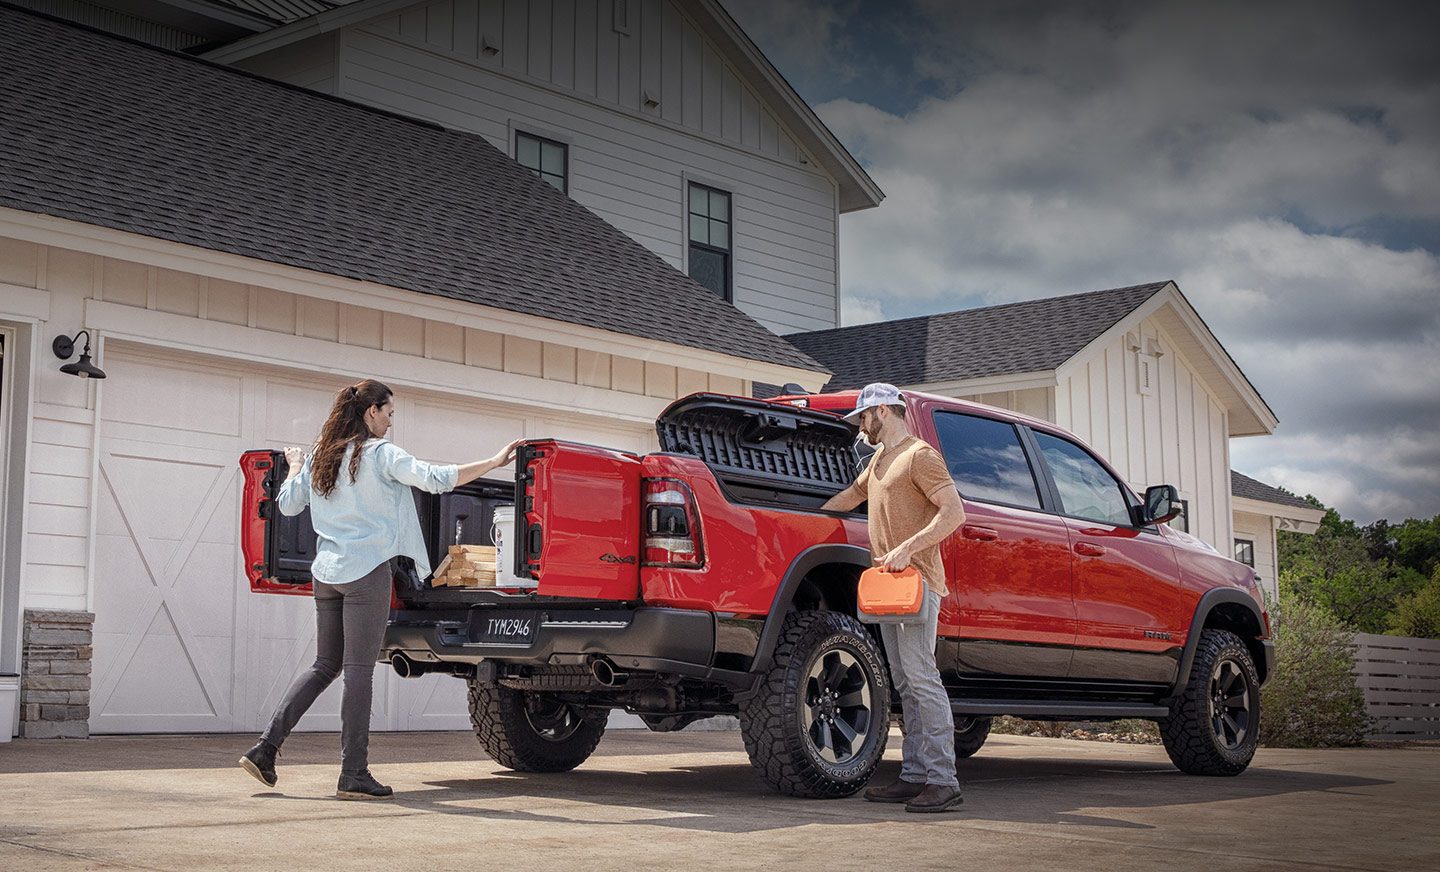 The multifunction tailgate doors of the 2020 Ram 1500 are open, as is the lid of the available RamBox Cargo Management system.